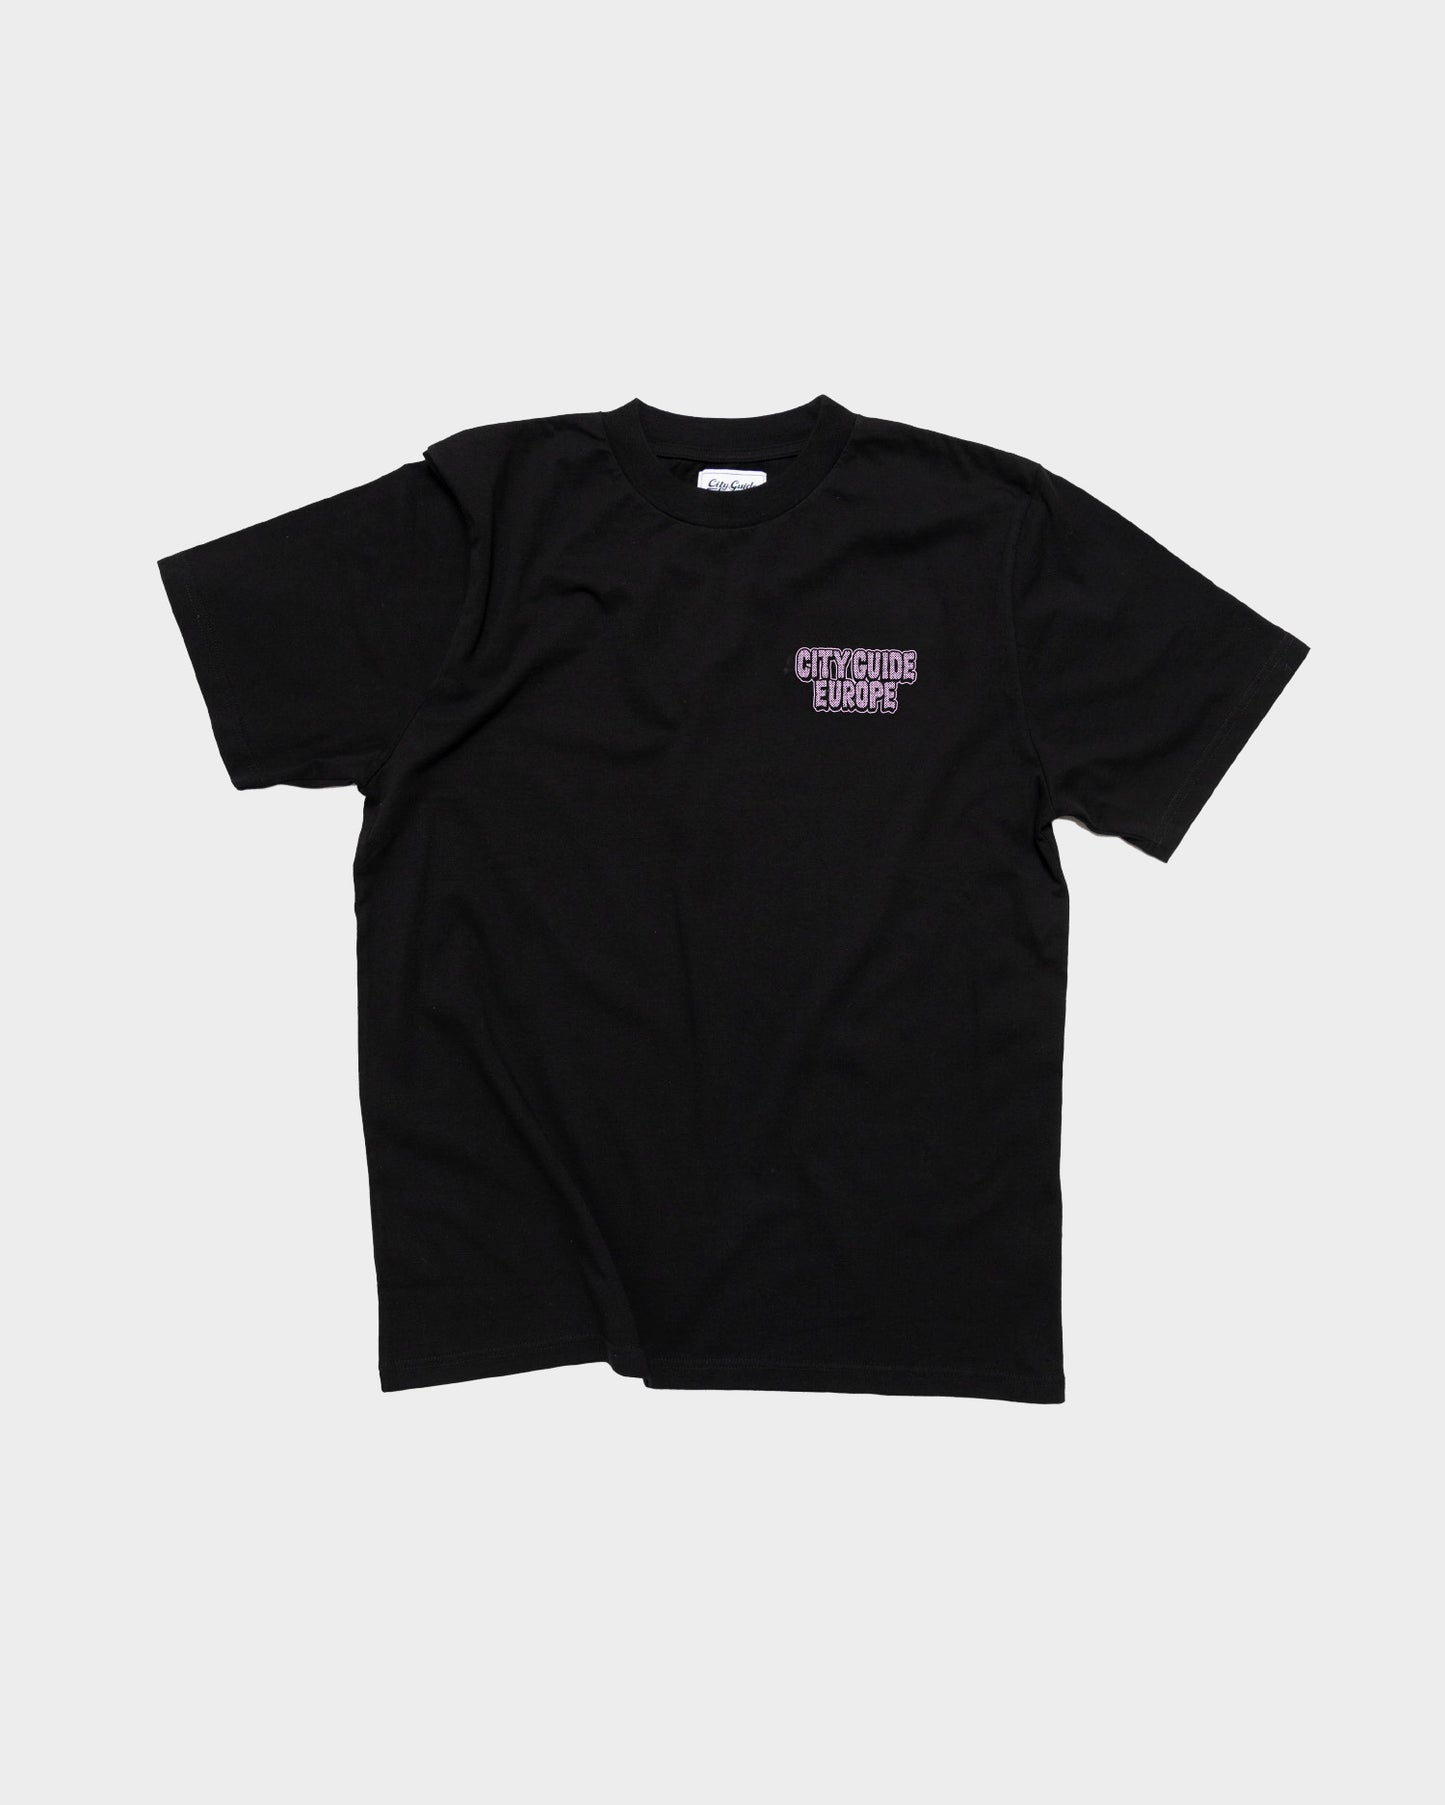 Pizzerian.nu "Approved by Series" Tee Black